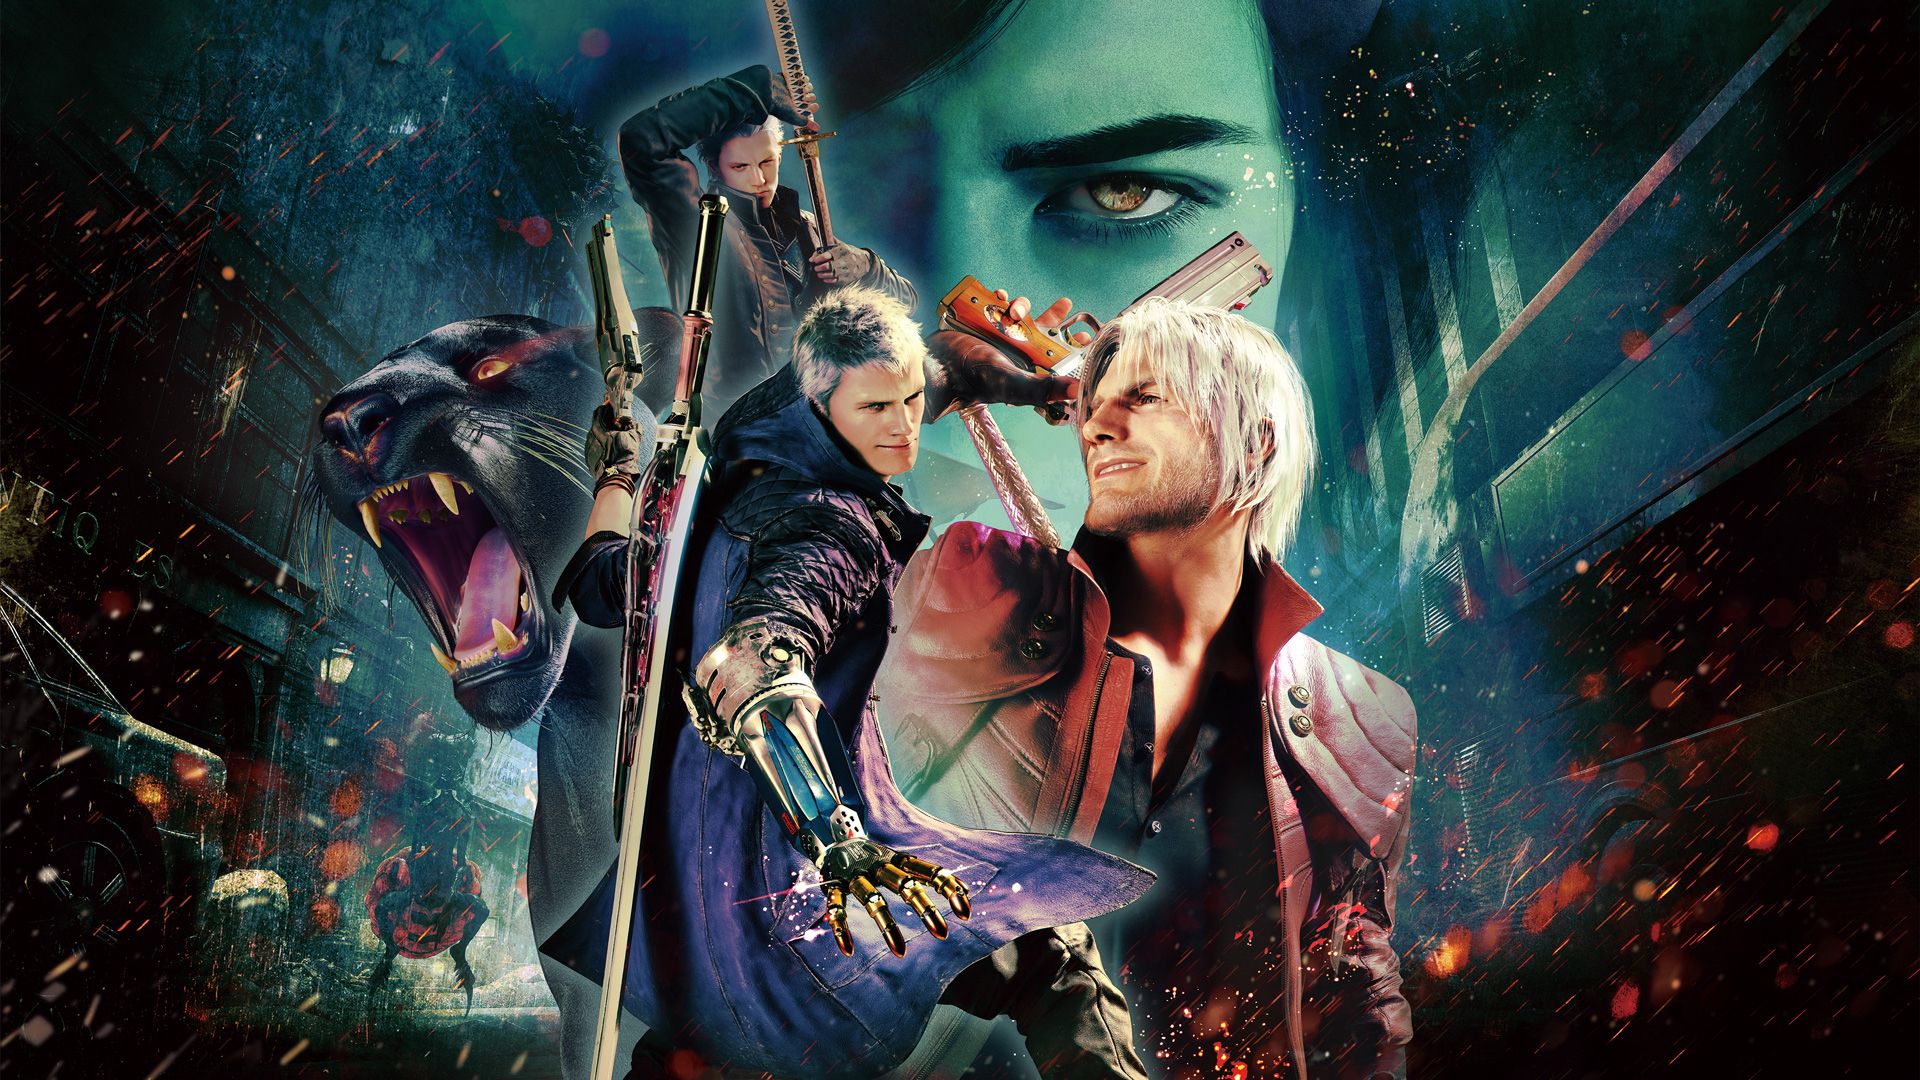 Best DMC 5 Wallpaper That Are Awesome